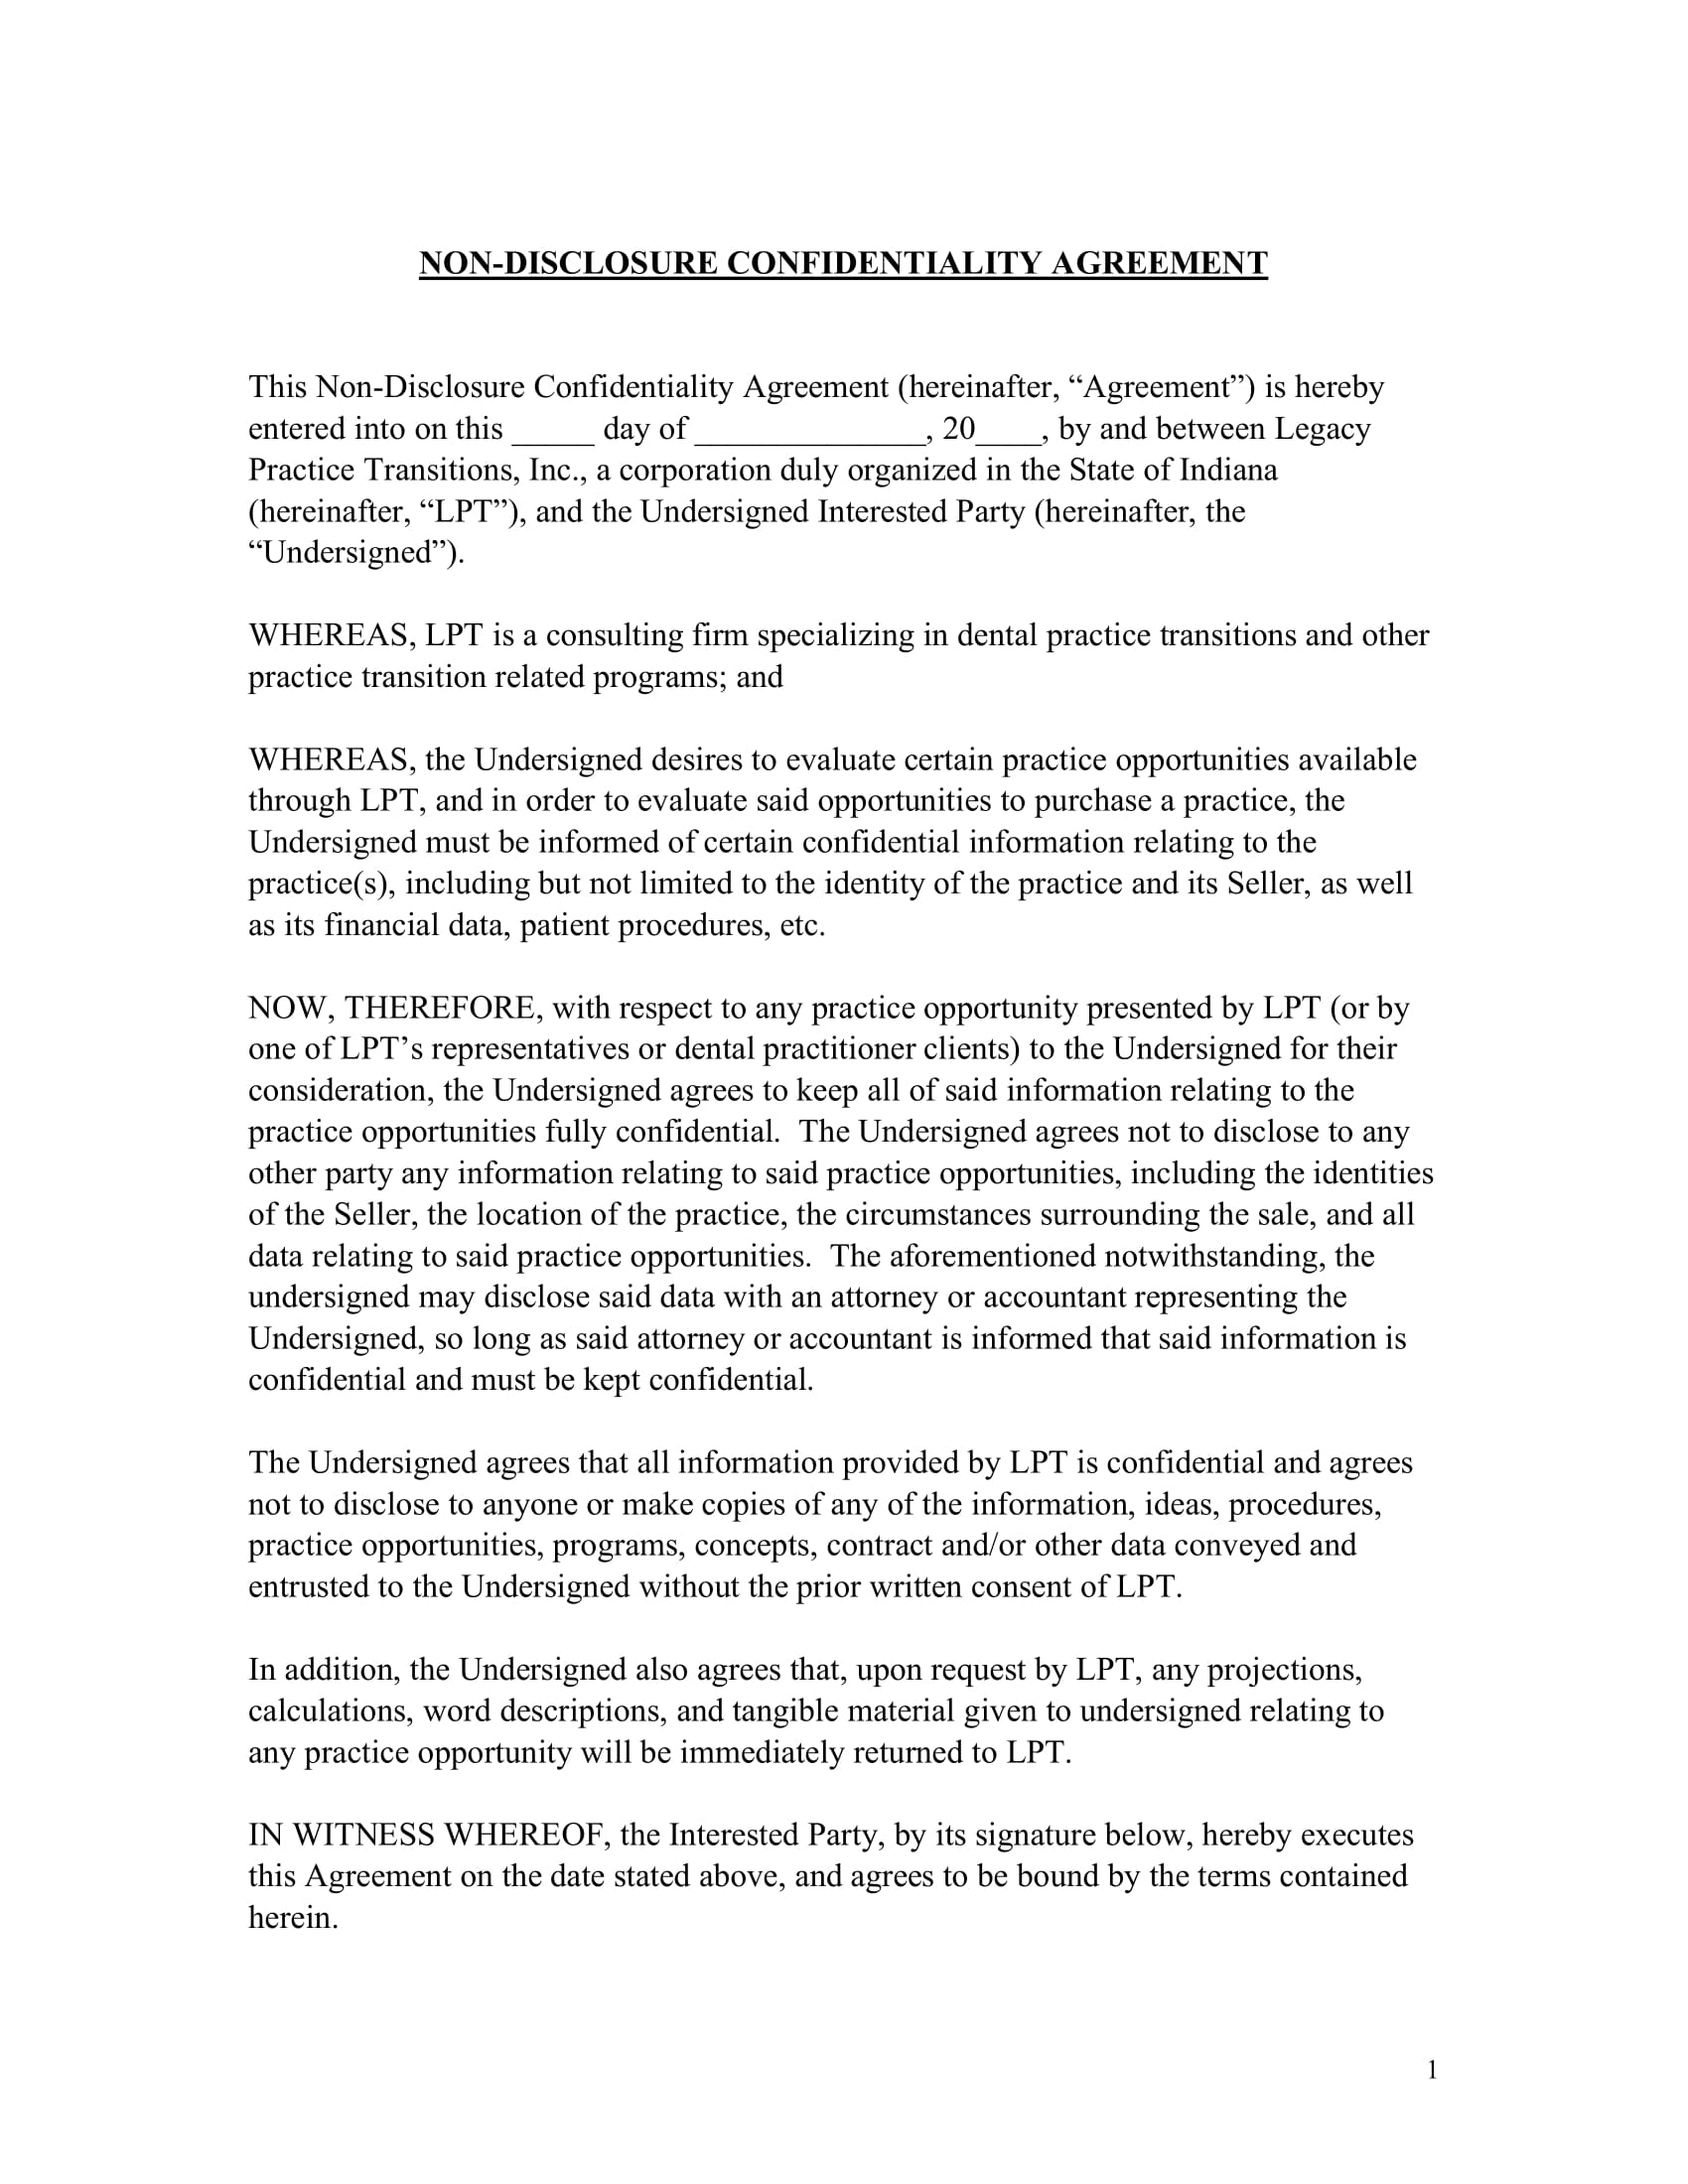 non disclosure confidentiality agreement example 1